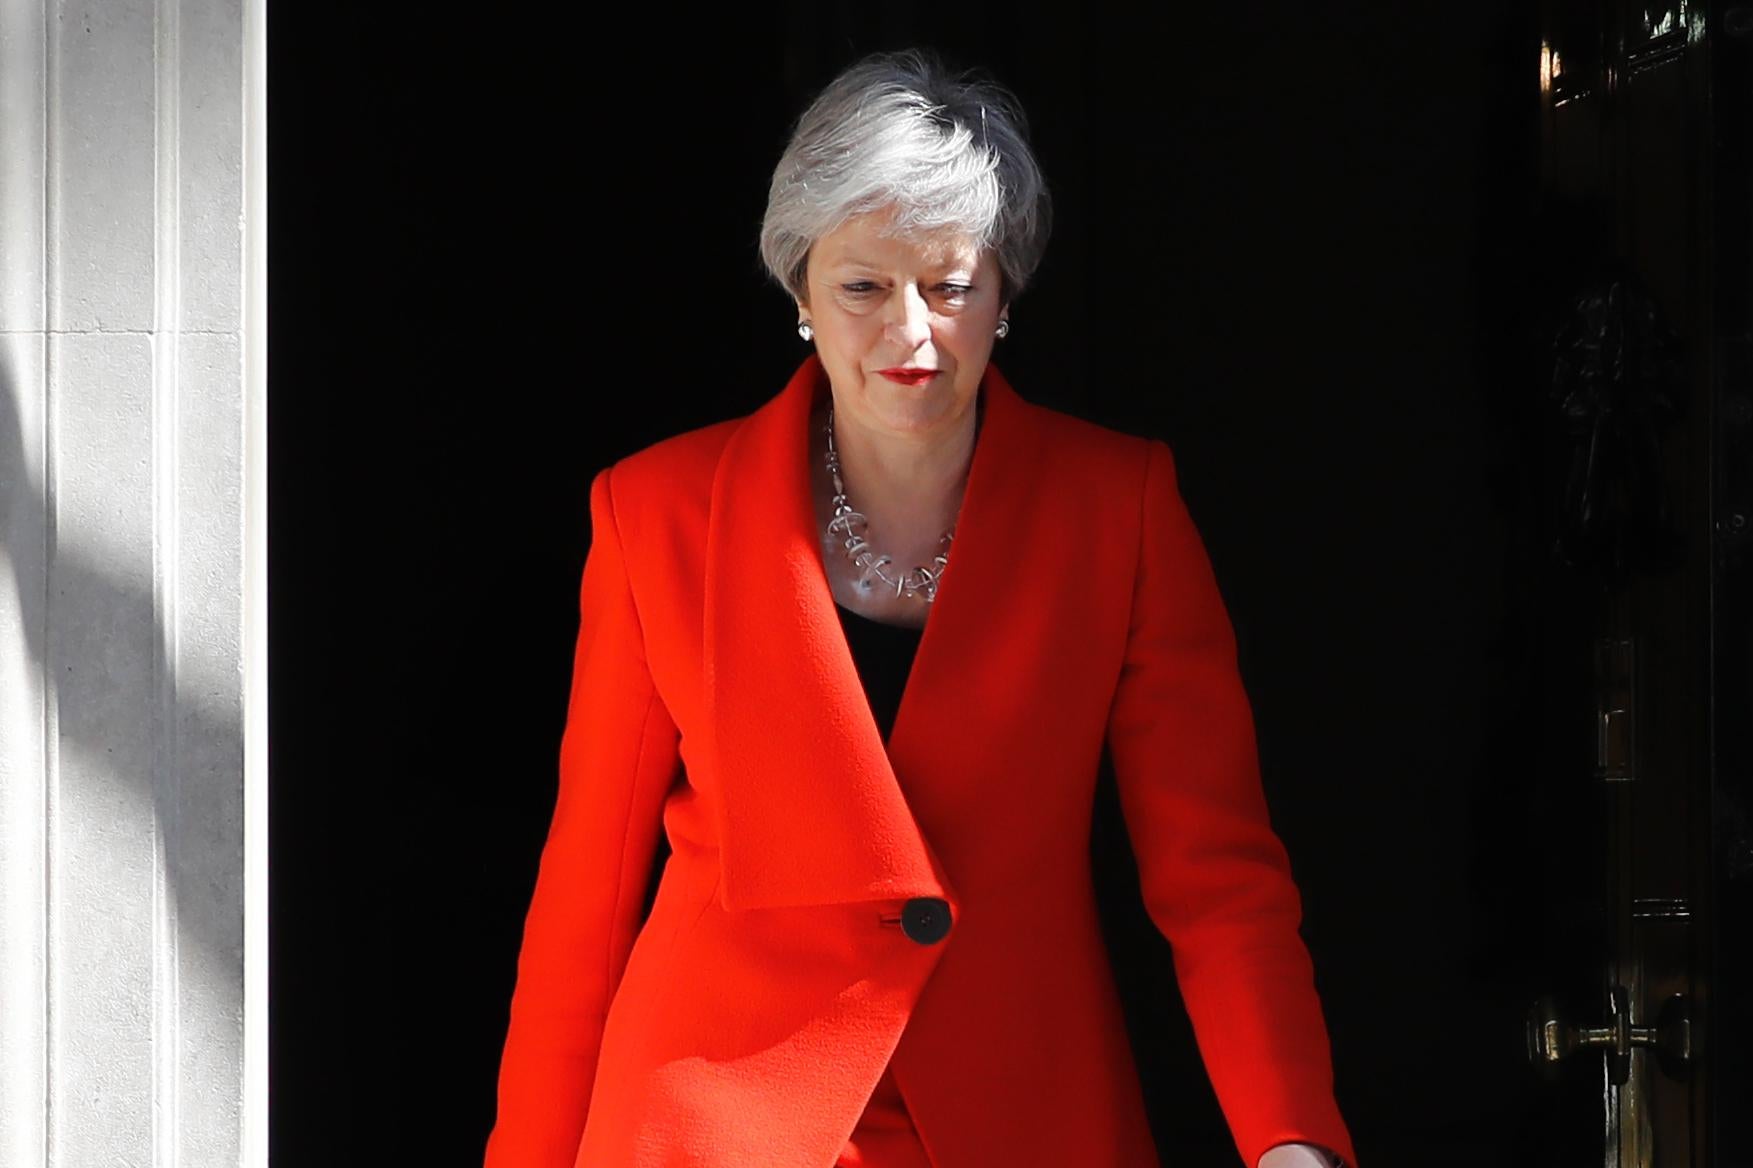 Britain's Prime Minister Theresa May arrives to announce her resignation outside 10 Downing Street in London on Friday.